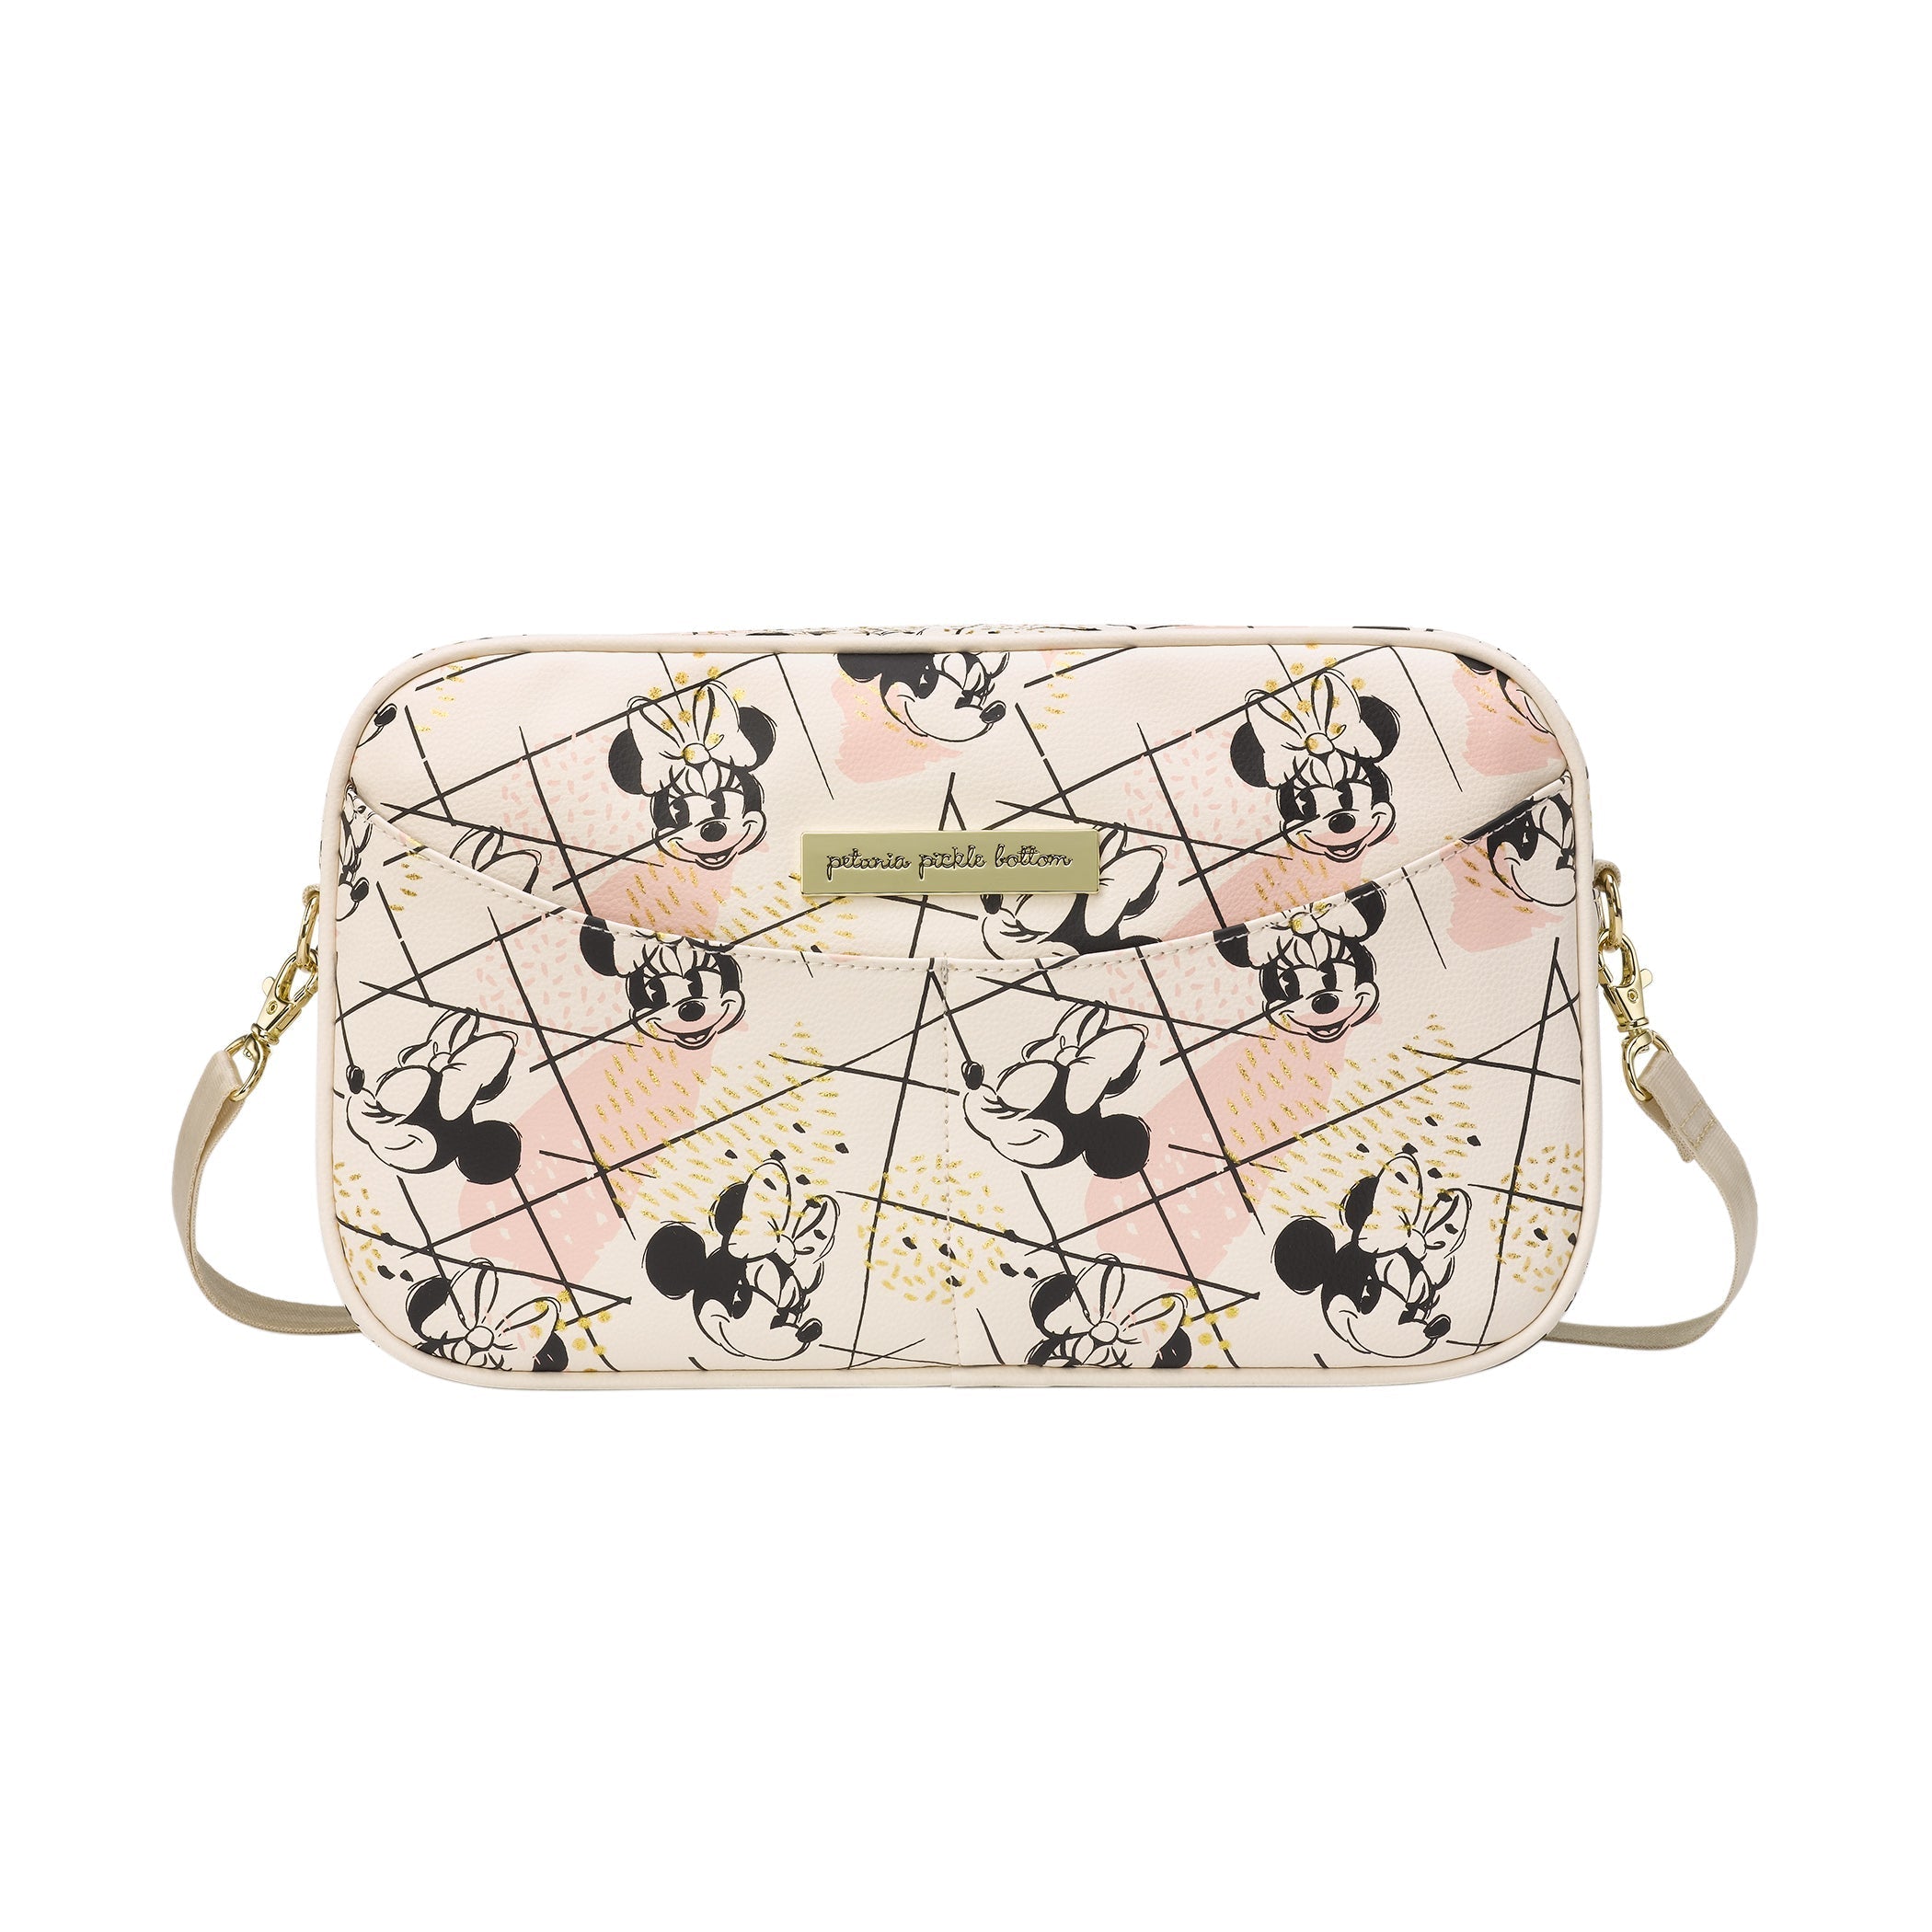 The Minnie Mouse belt bag I didn't know I needed in my life! I